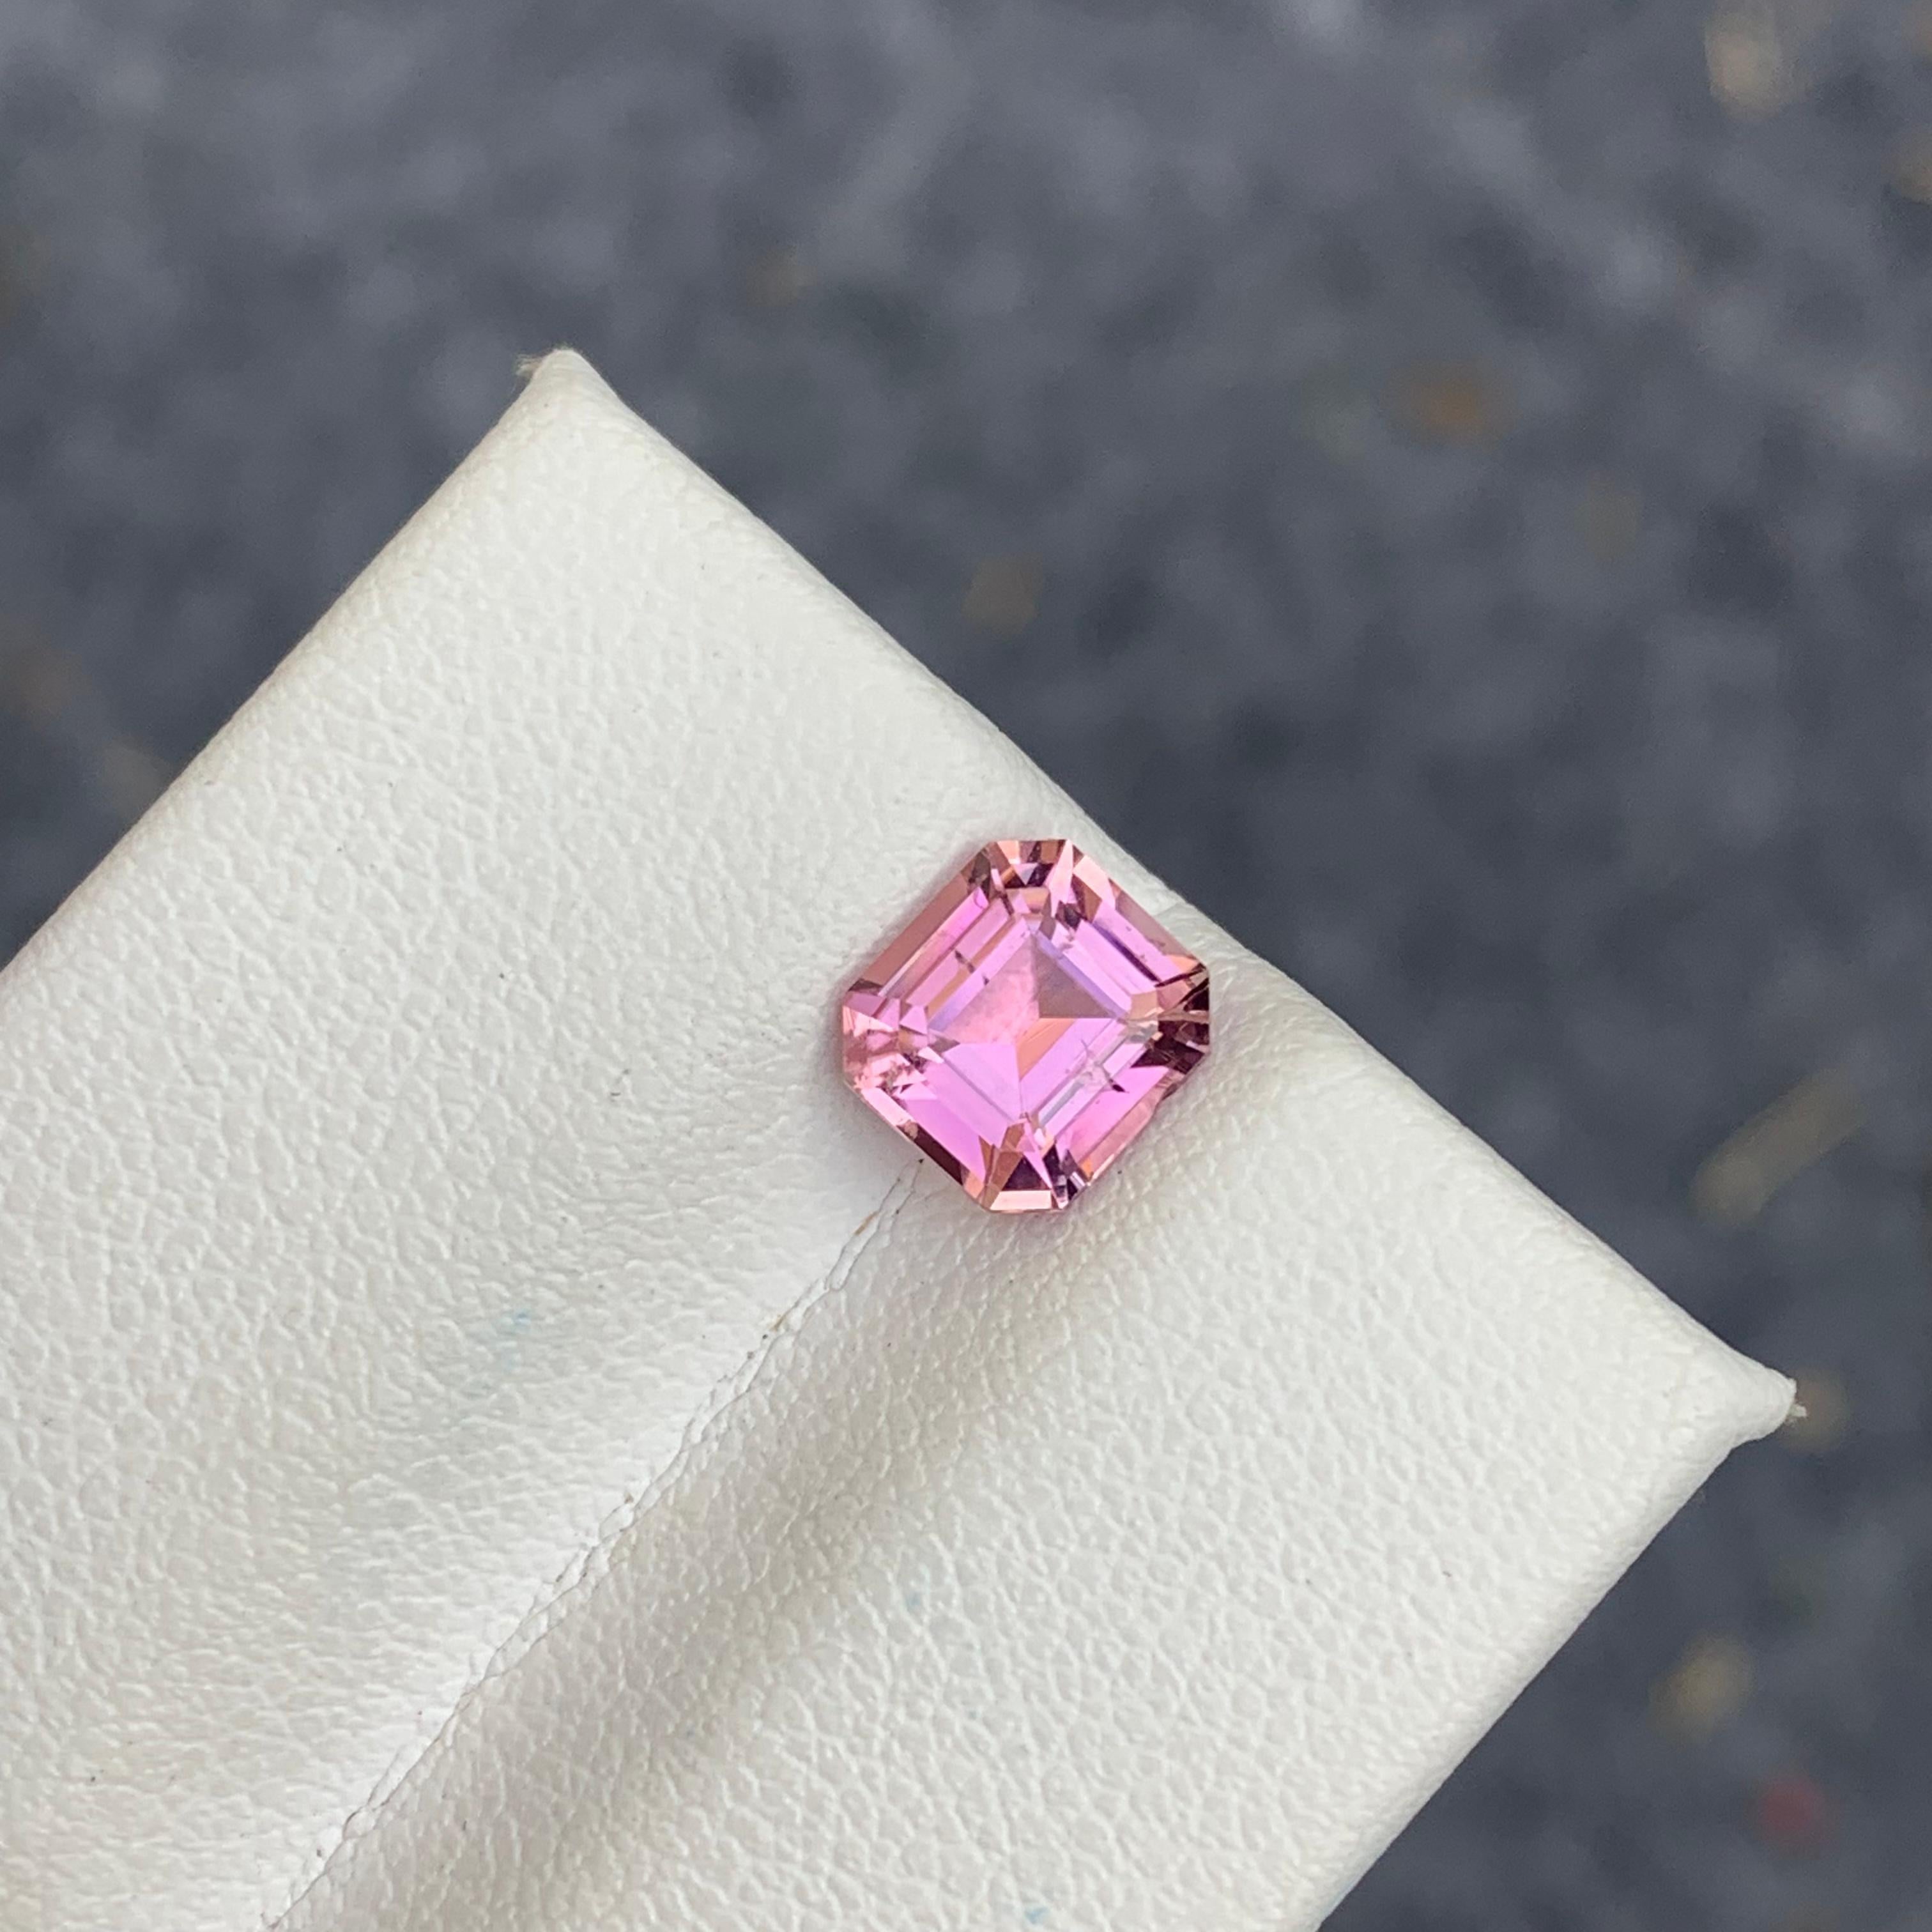 Women's or Men's 1.50 Carats Natural Loose Pale Pink Tourmaline Gemstone from Afghan Mine For Sale